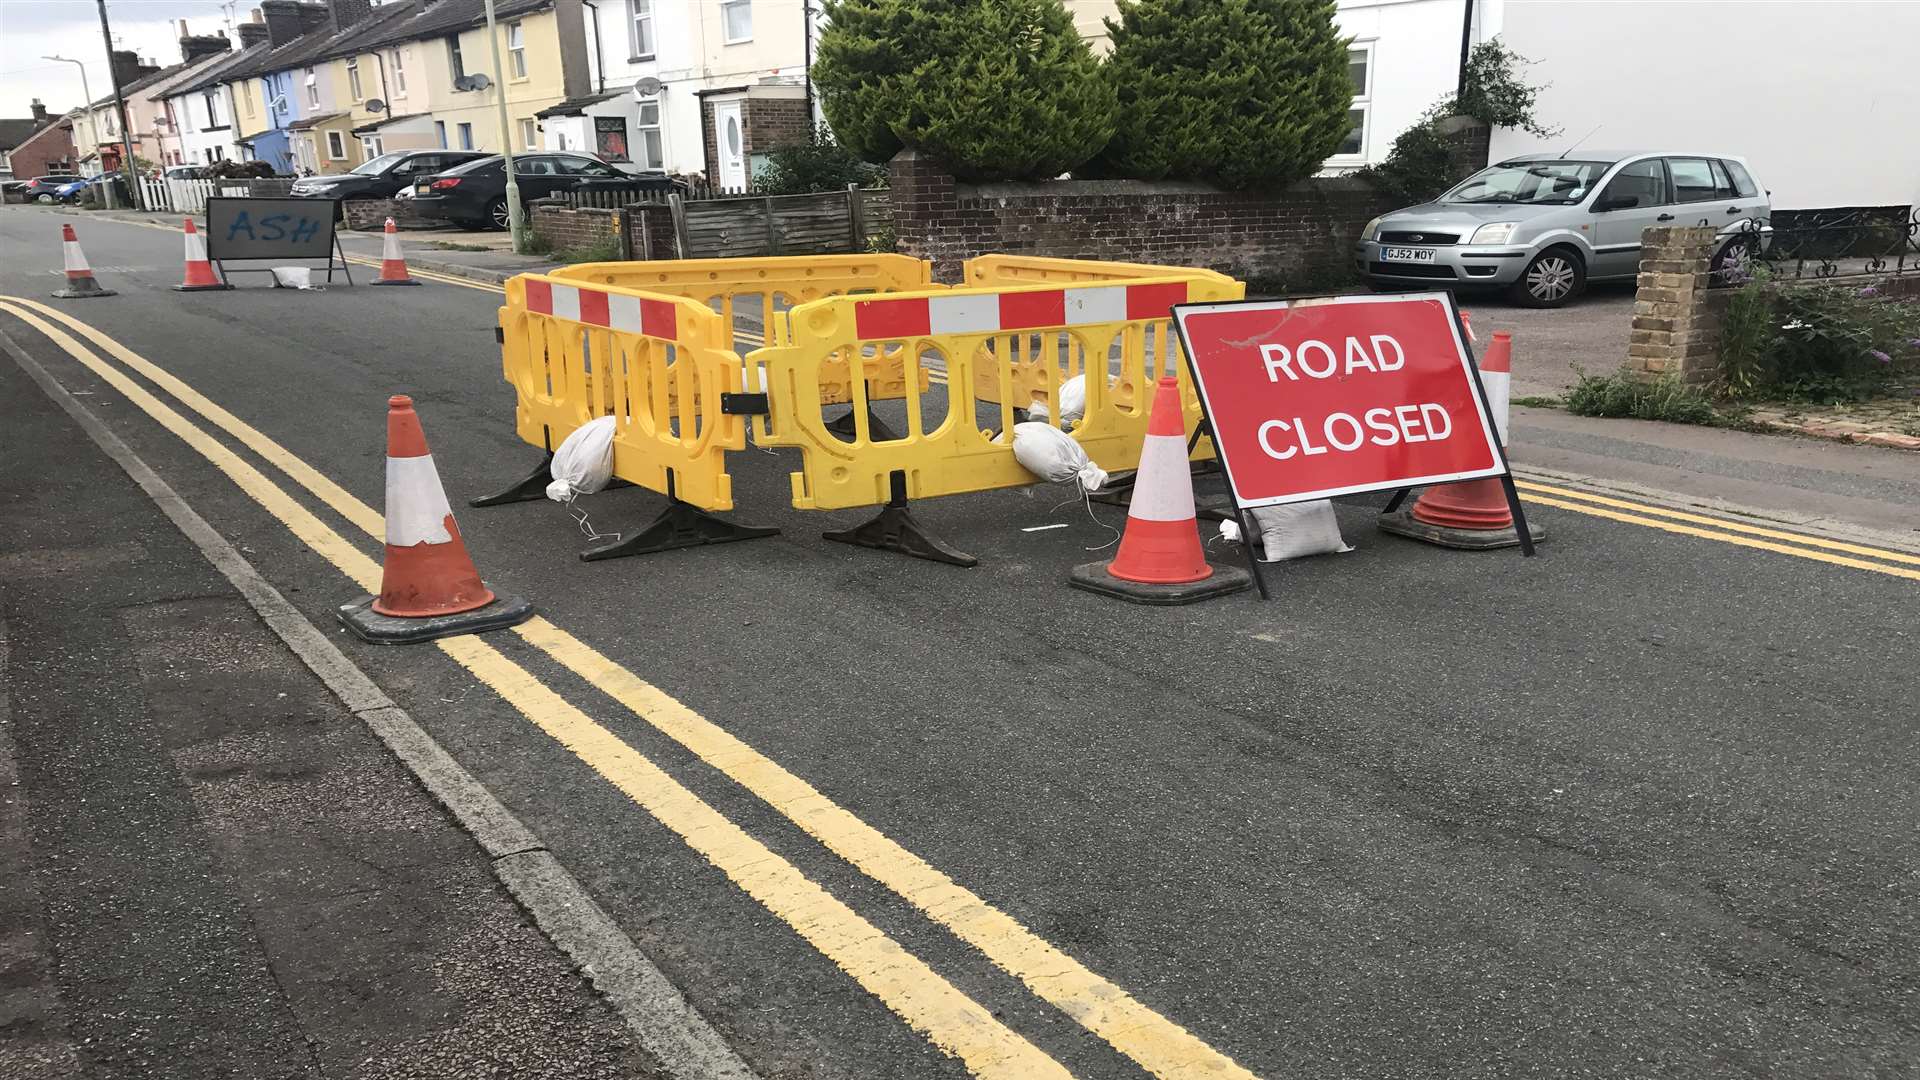 Part of Torrington Lane has been closed due to a sinkhole